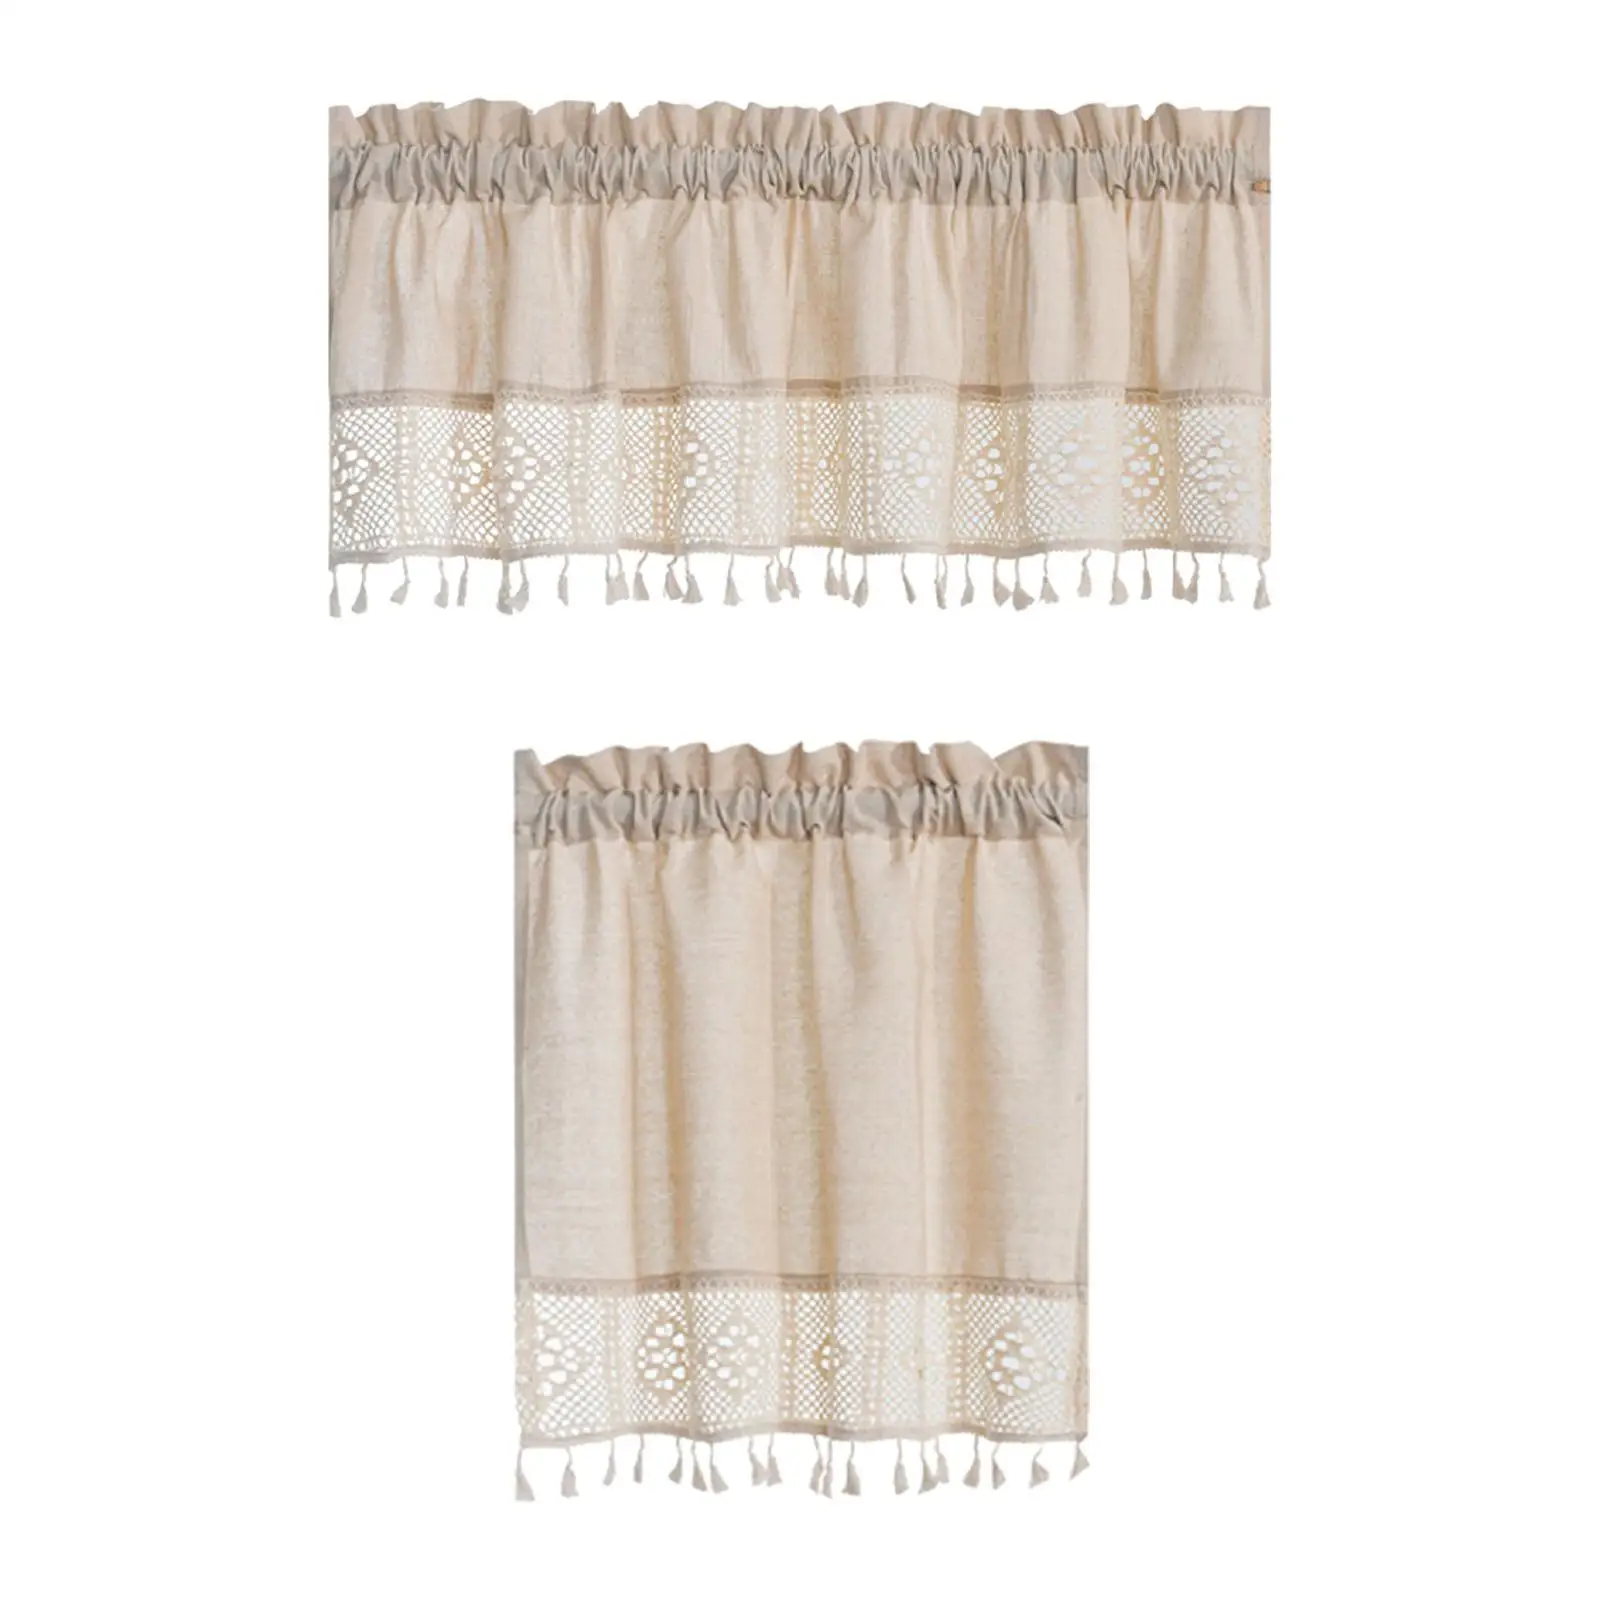 Farmhouse Valance Short Tier Drapes Breathable Window Screen Windows Short Curtain for Home Kitchen Cafe Living Room Decoration